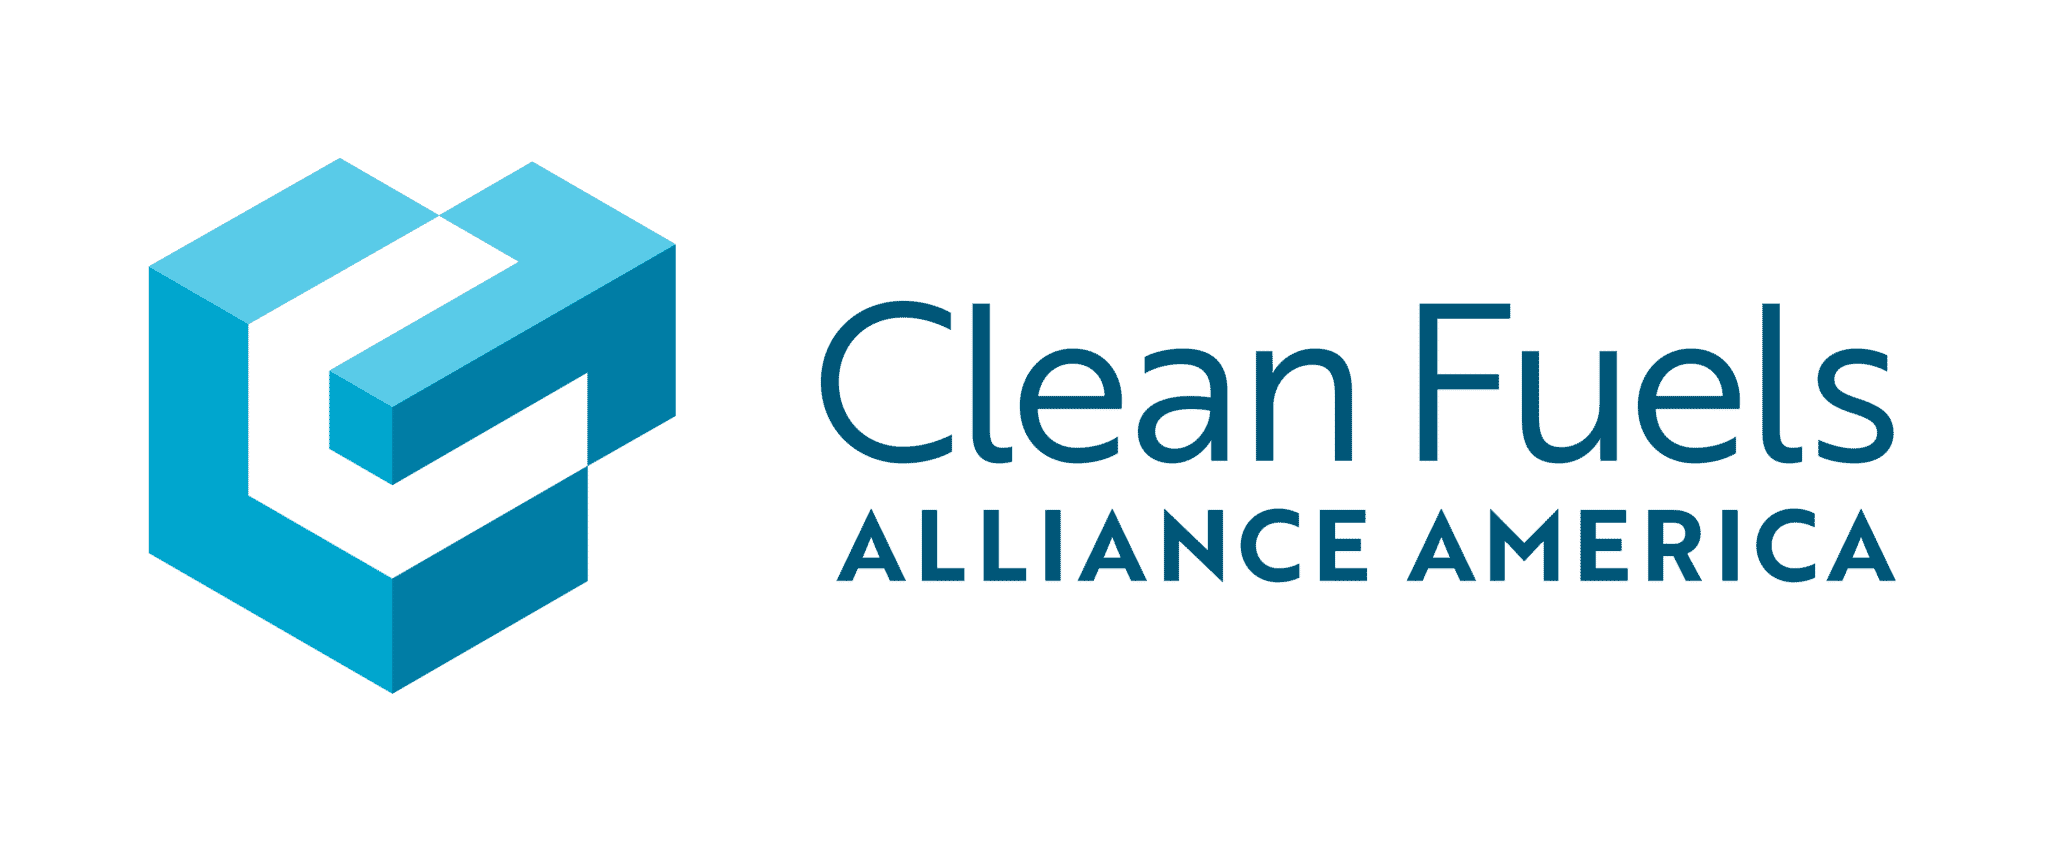 Clean Fuels Alliance America Full Color HORIZONTAL